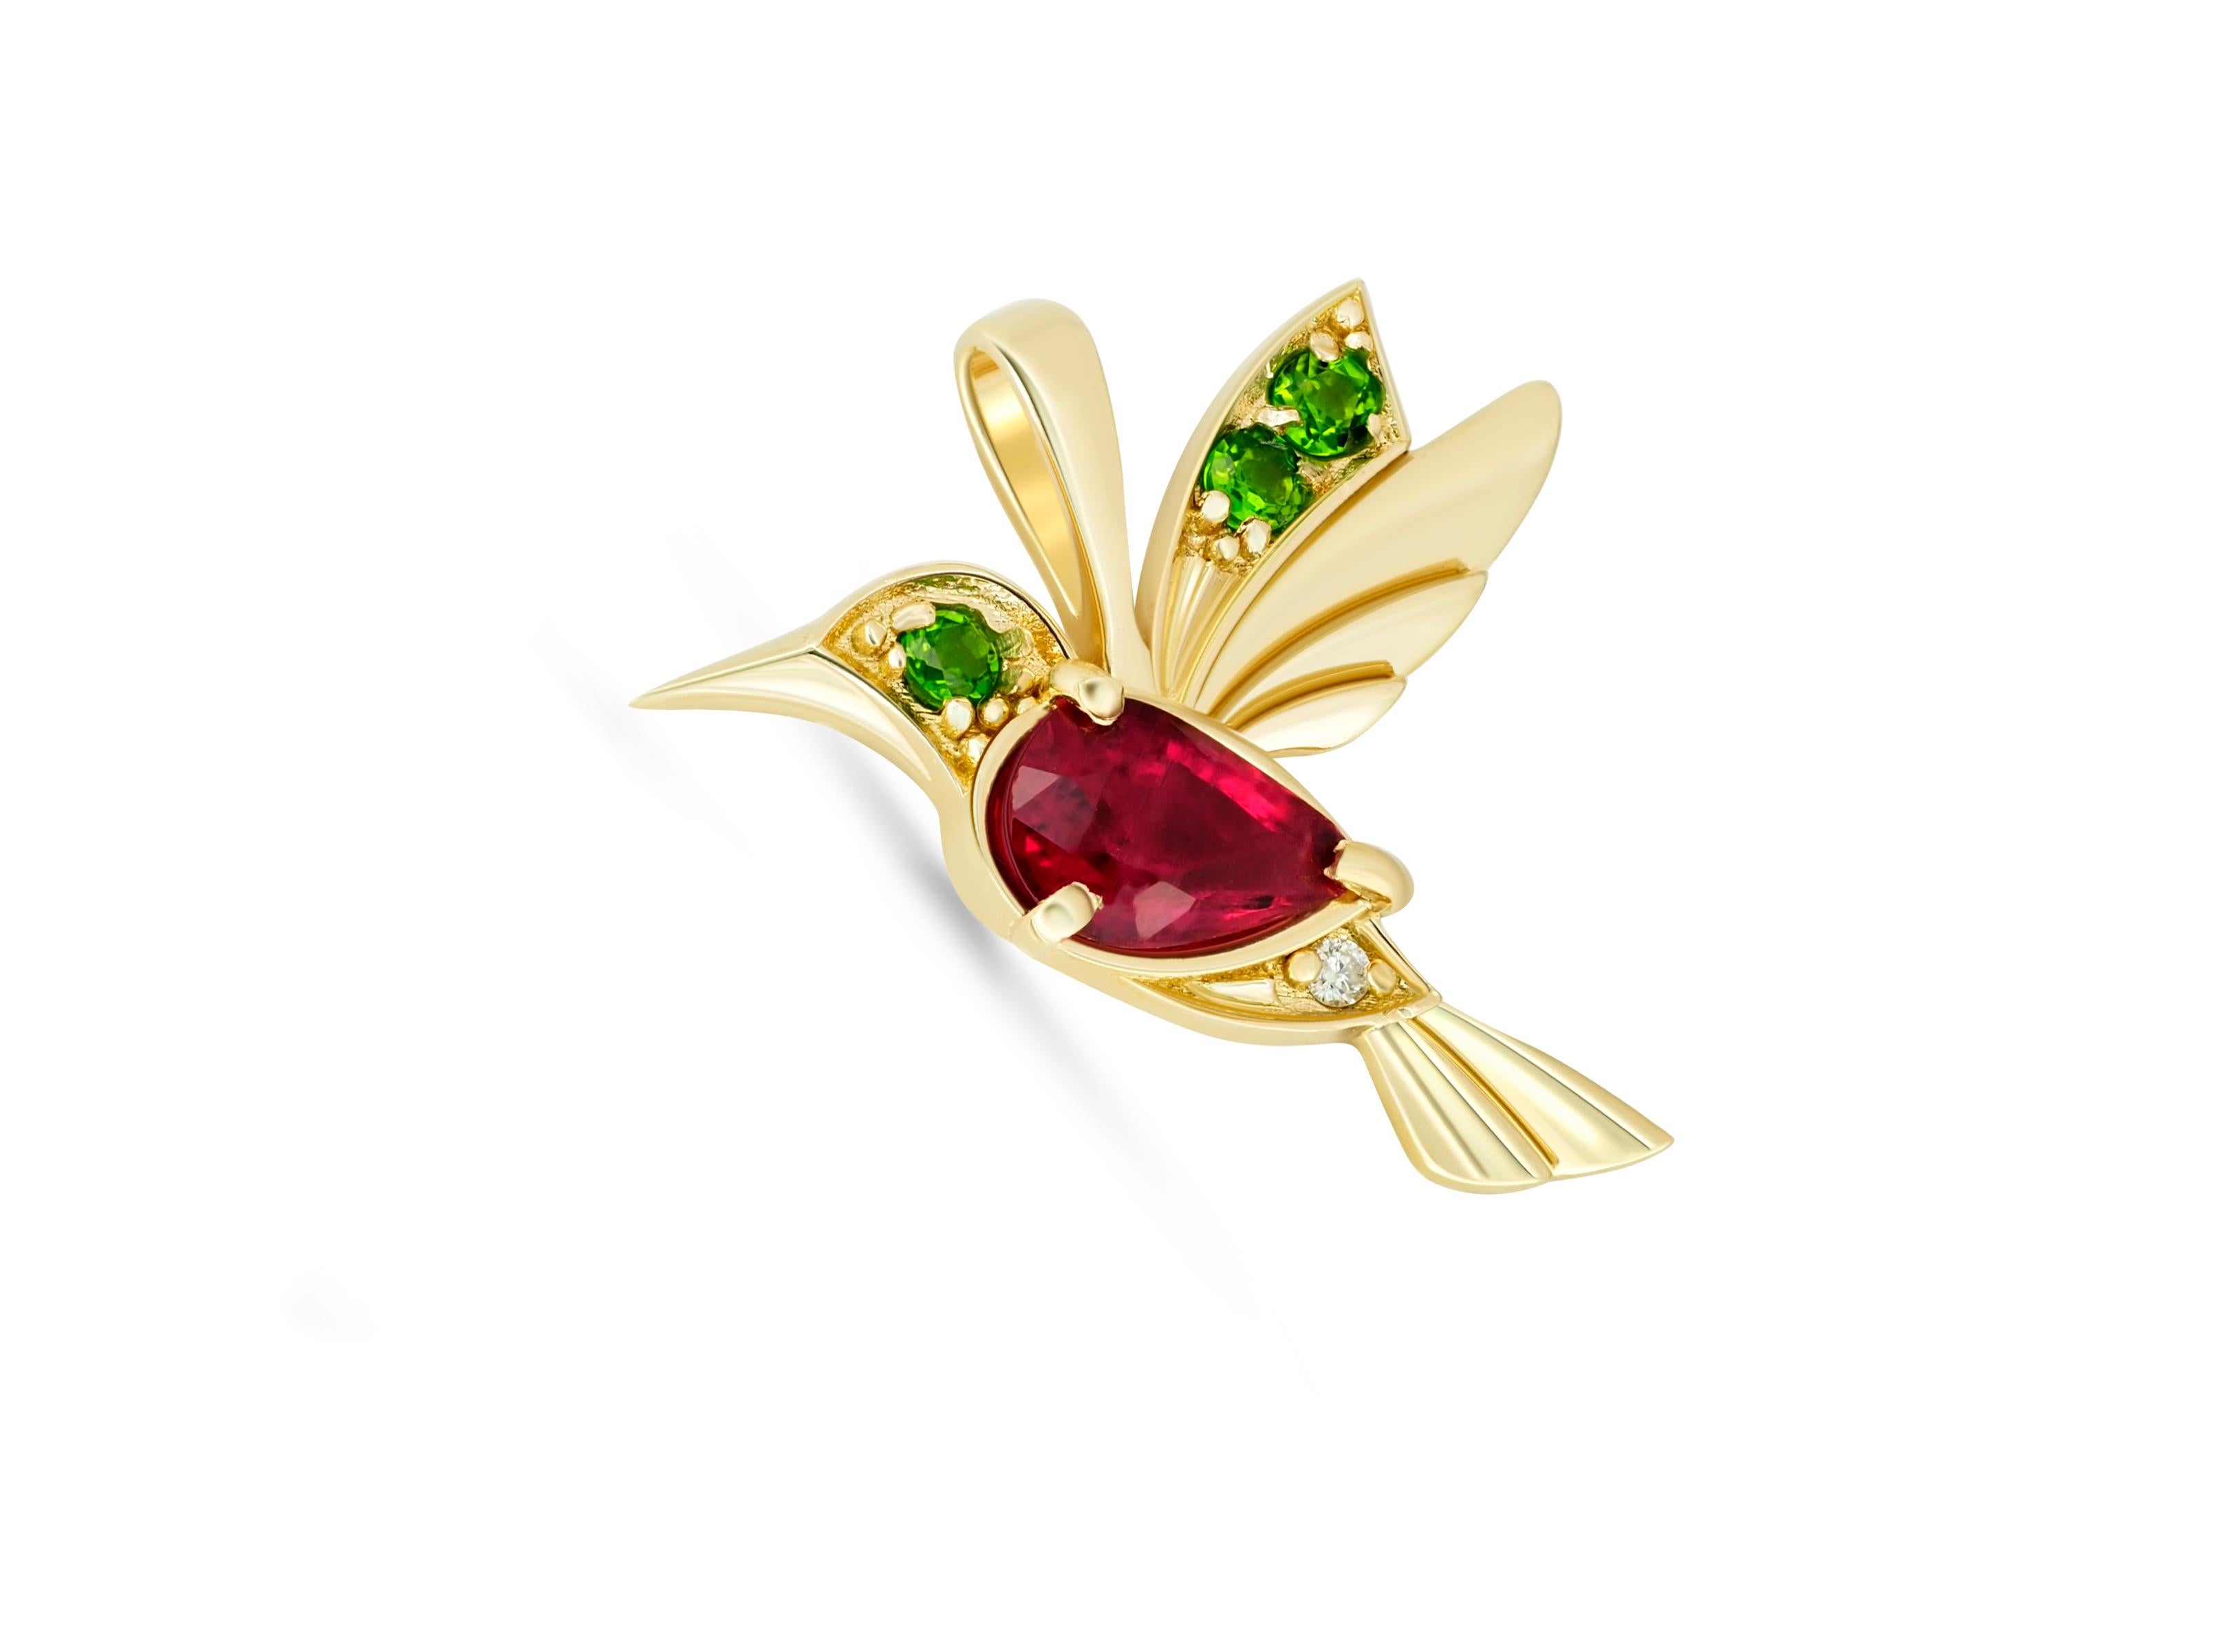 Women's 14k Gold Hummingbird Pendant with Rubies.  For Sale